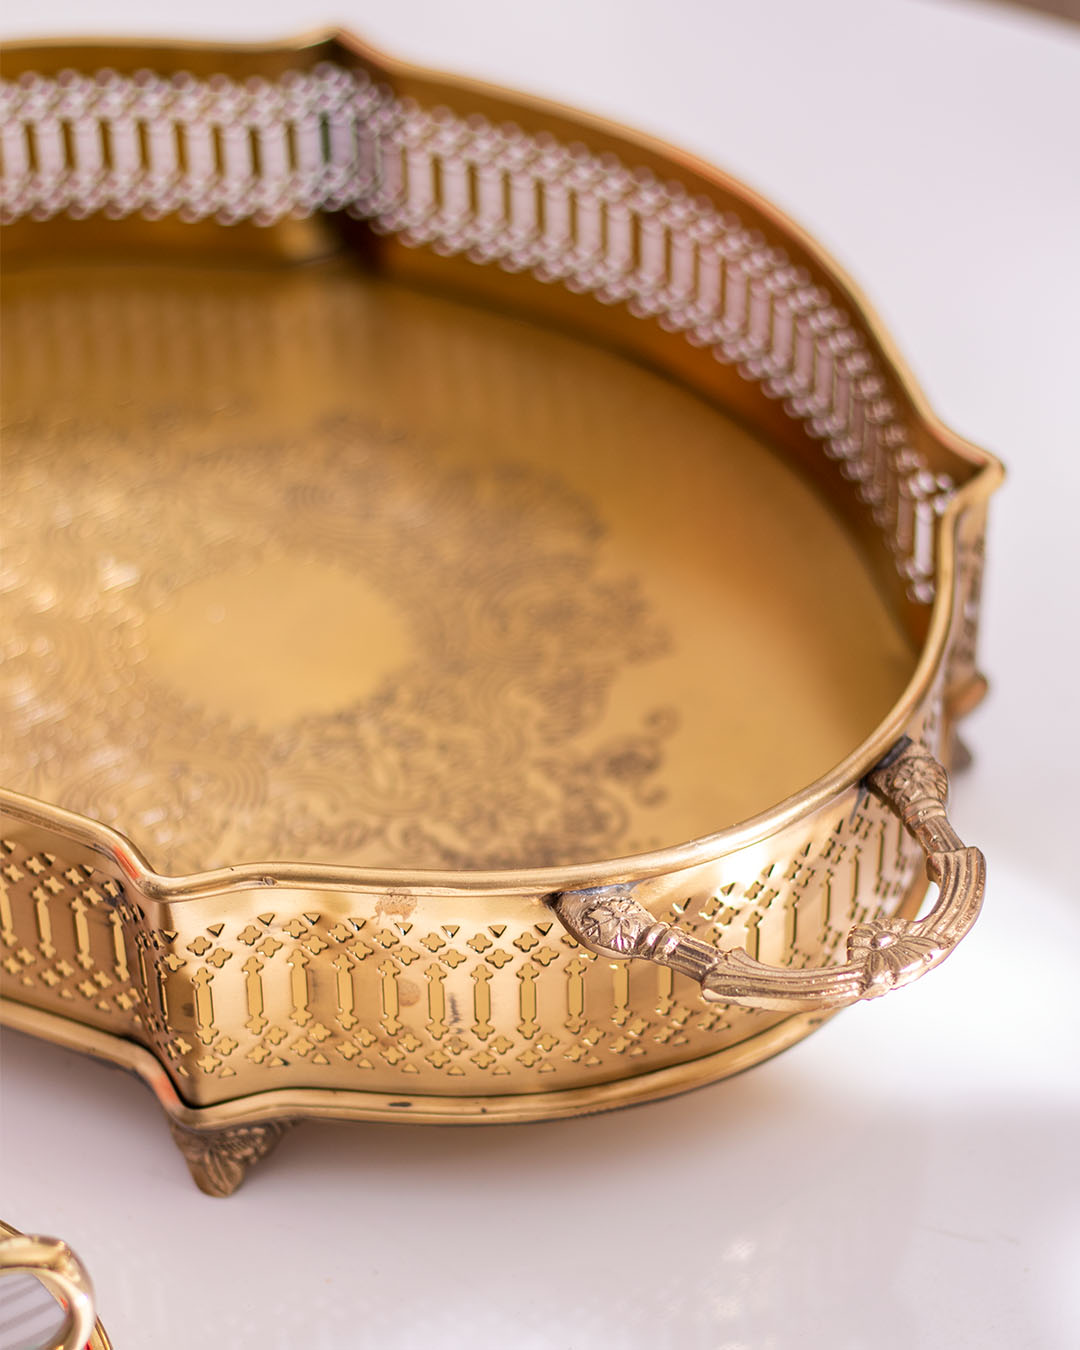 Close-up of gold tray handle with delicate lace cut-out detailing, showcasing exquisite craftsmanship for home decor.